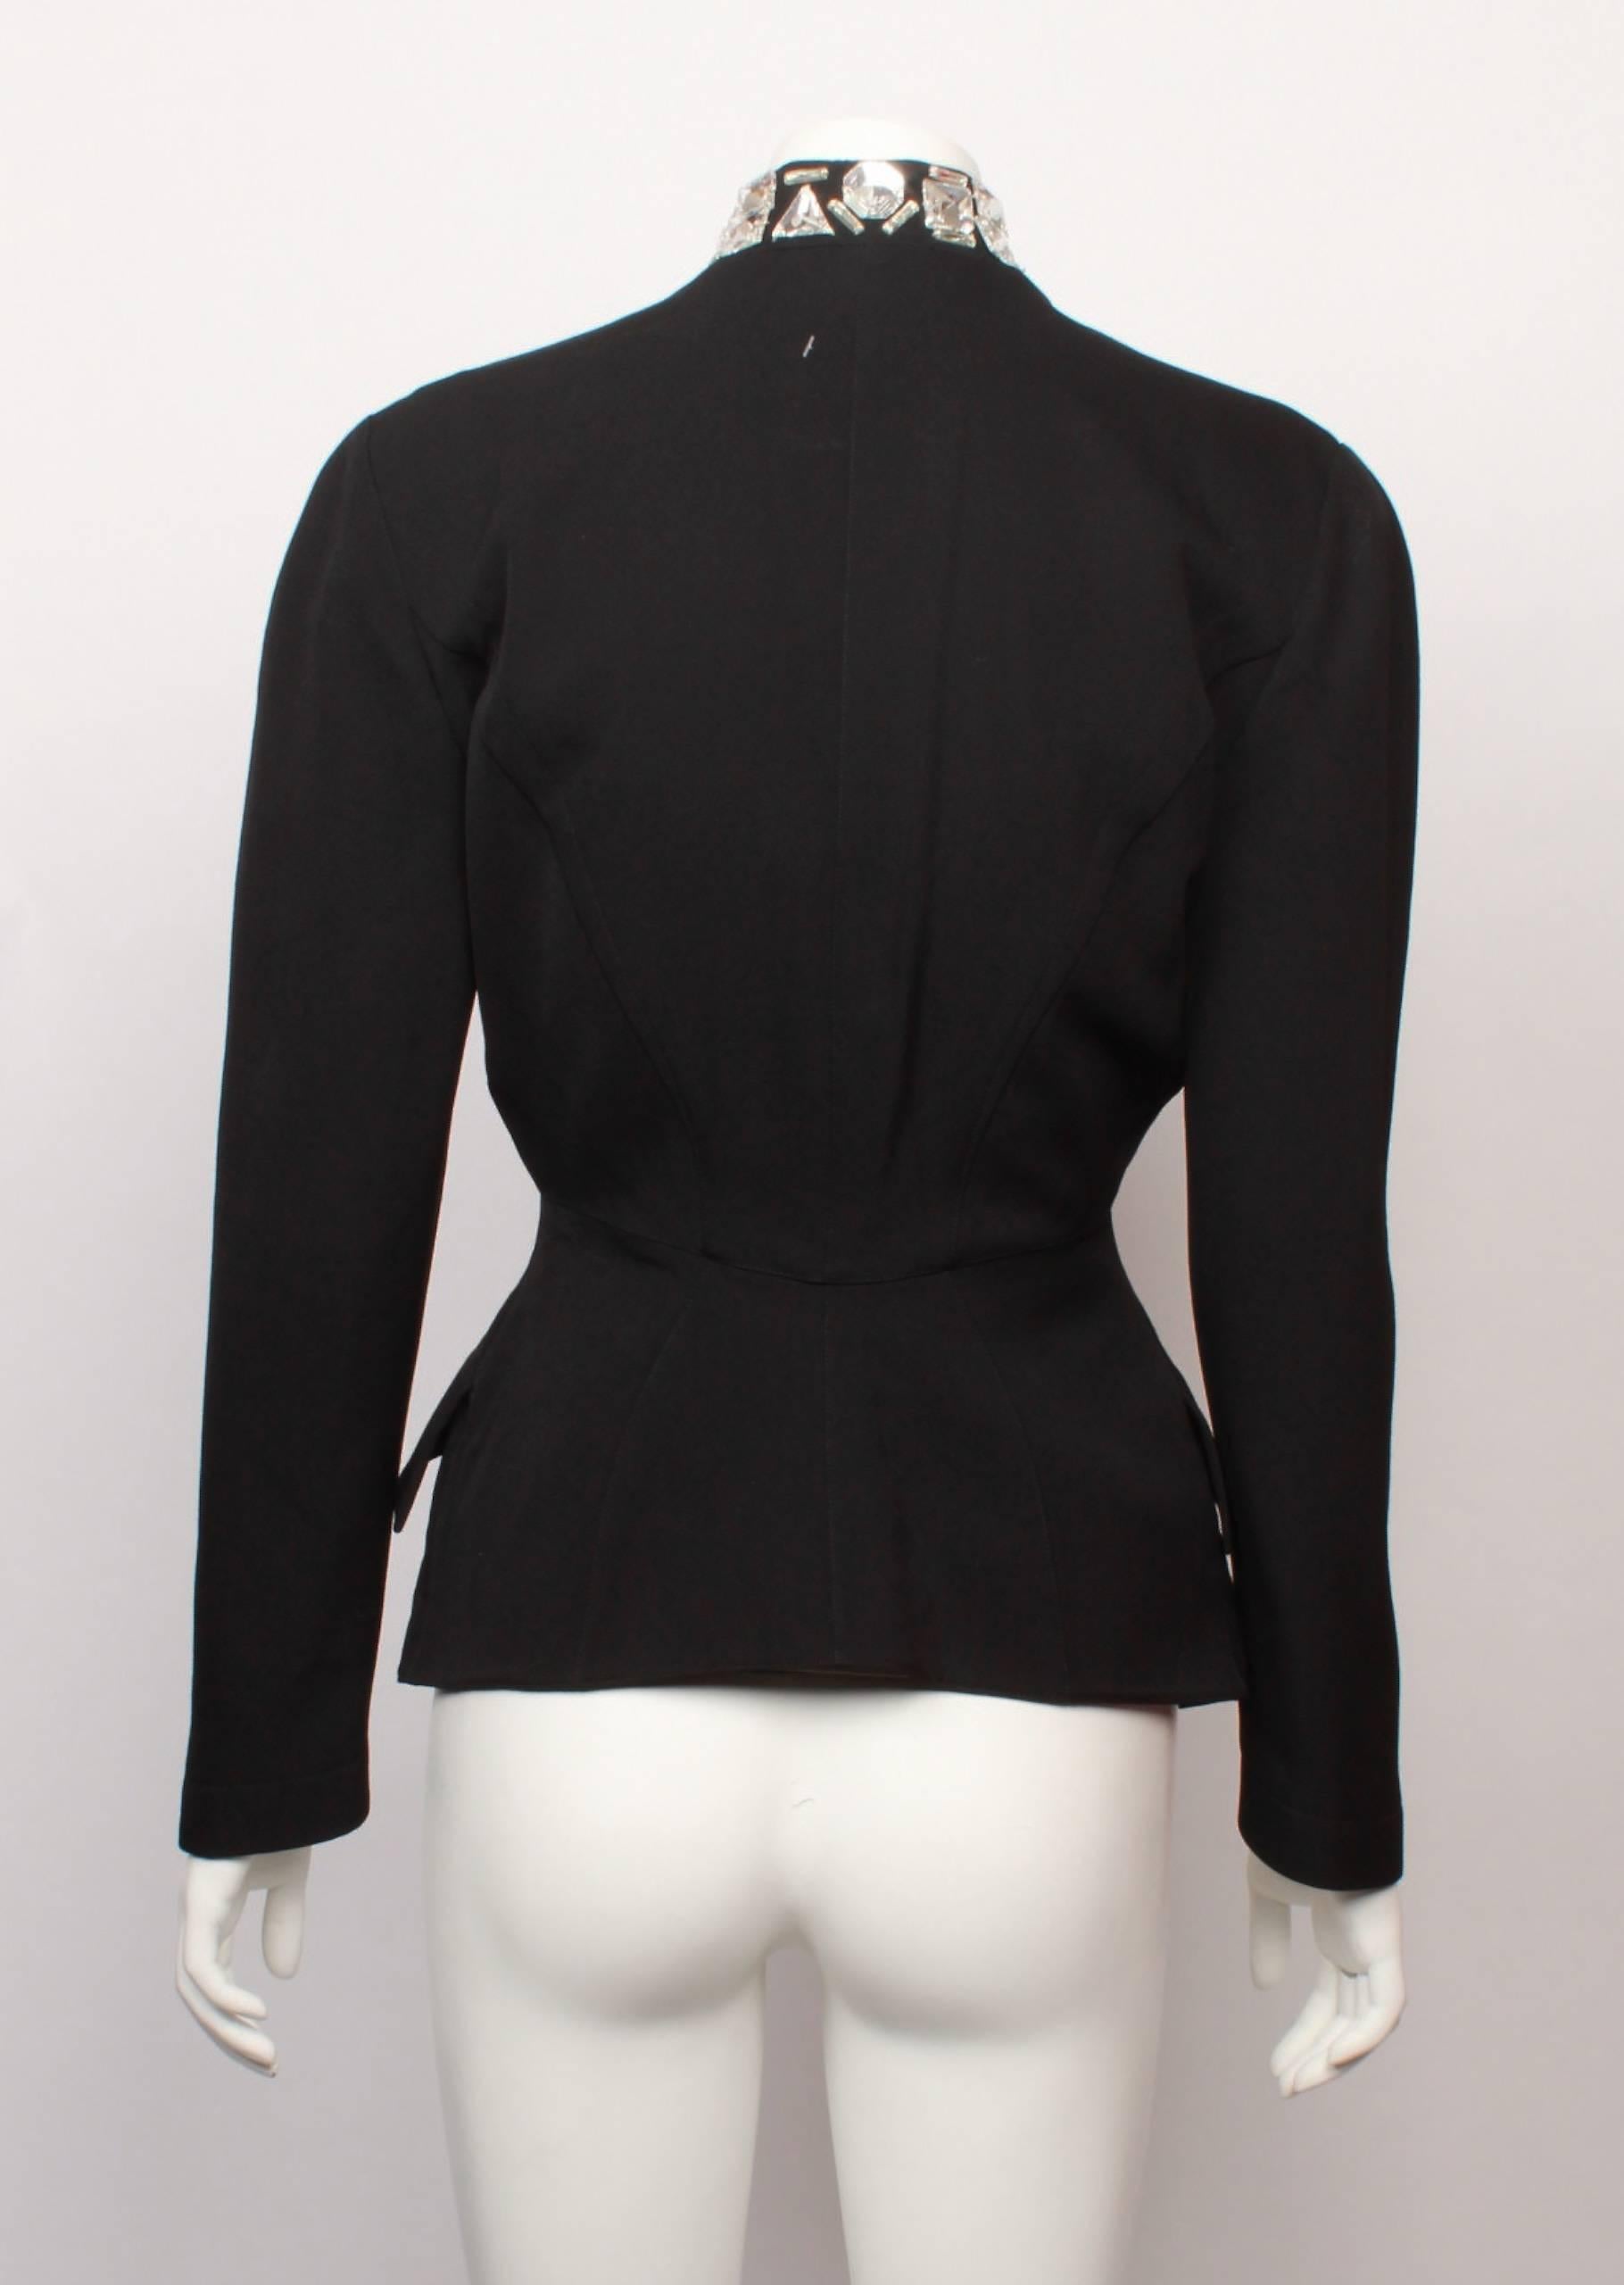 Women's Thierry Mugler  Fitted  Black Jacket with  Jewelled Crystal Collar